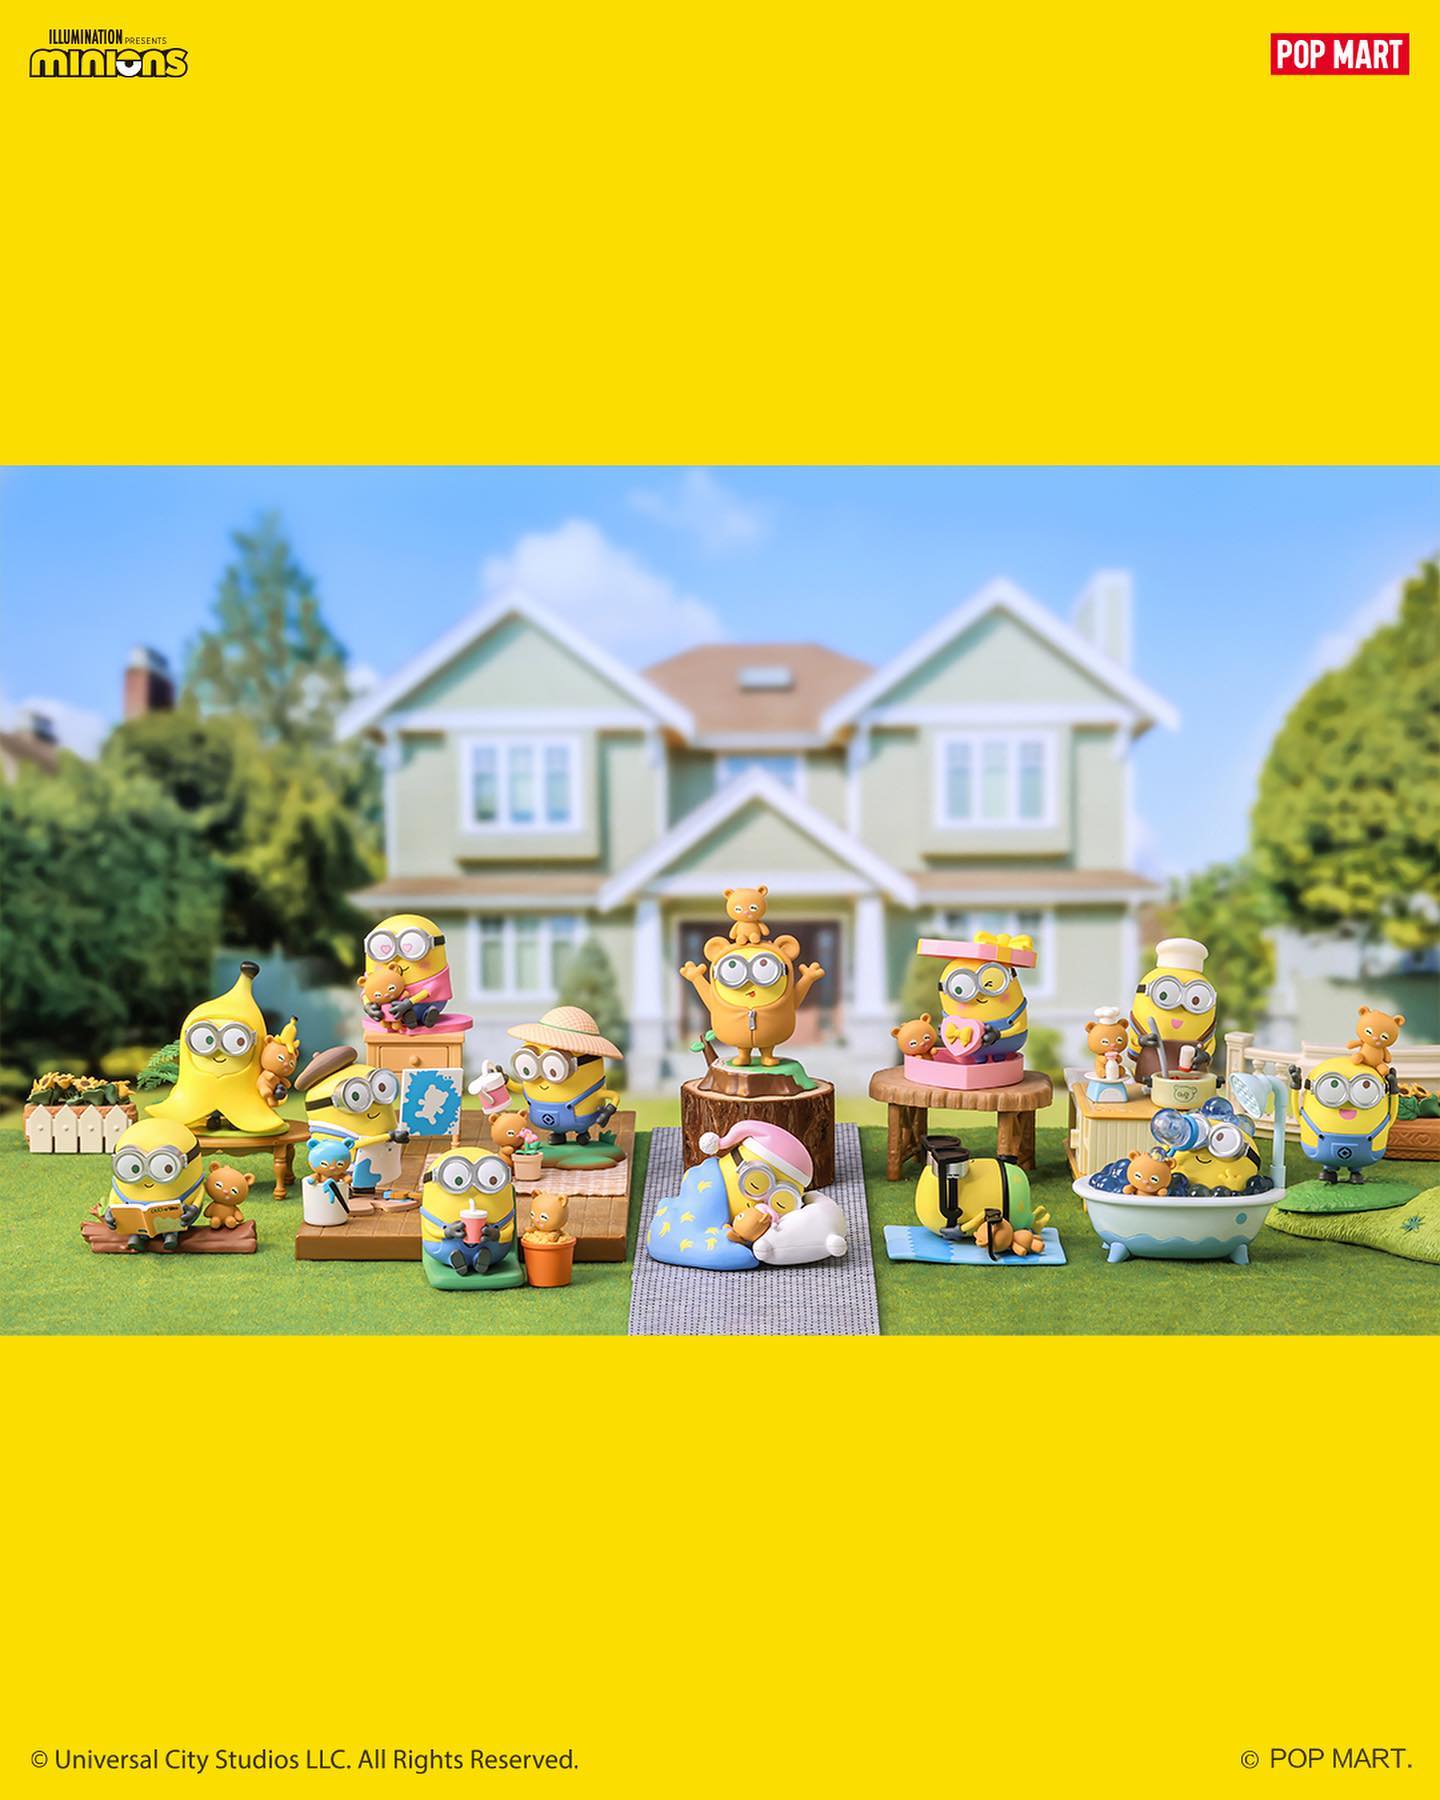 POP MART Minions Better Together Series – ActionCity